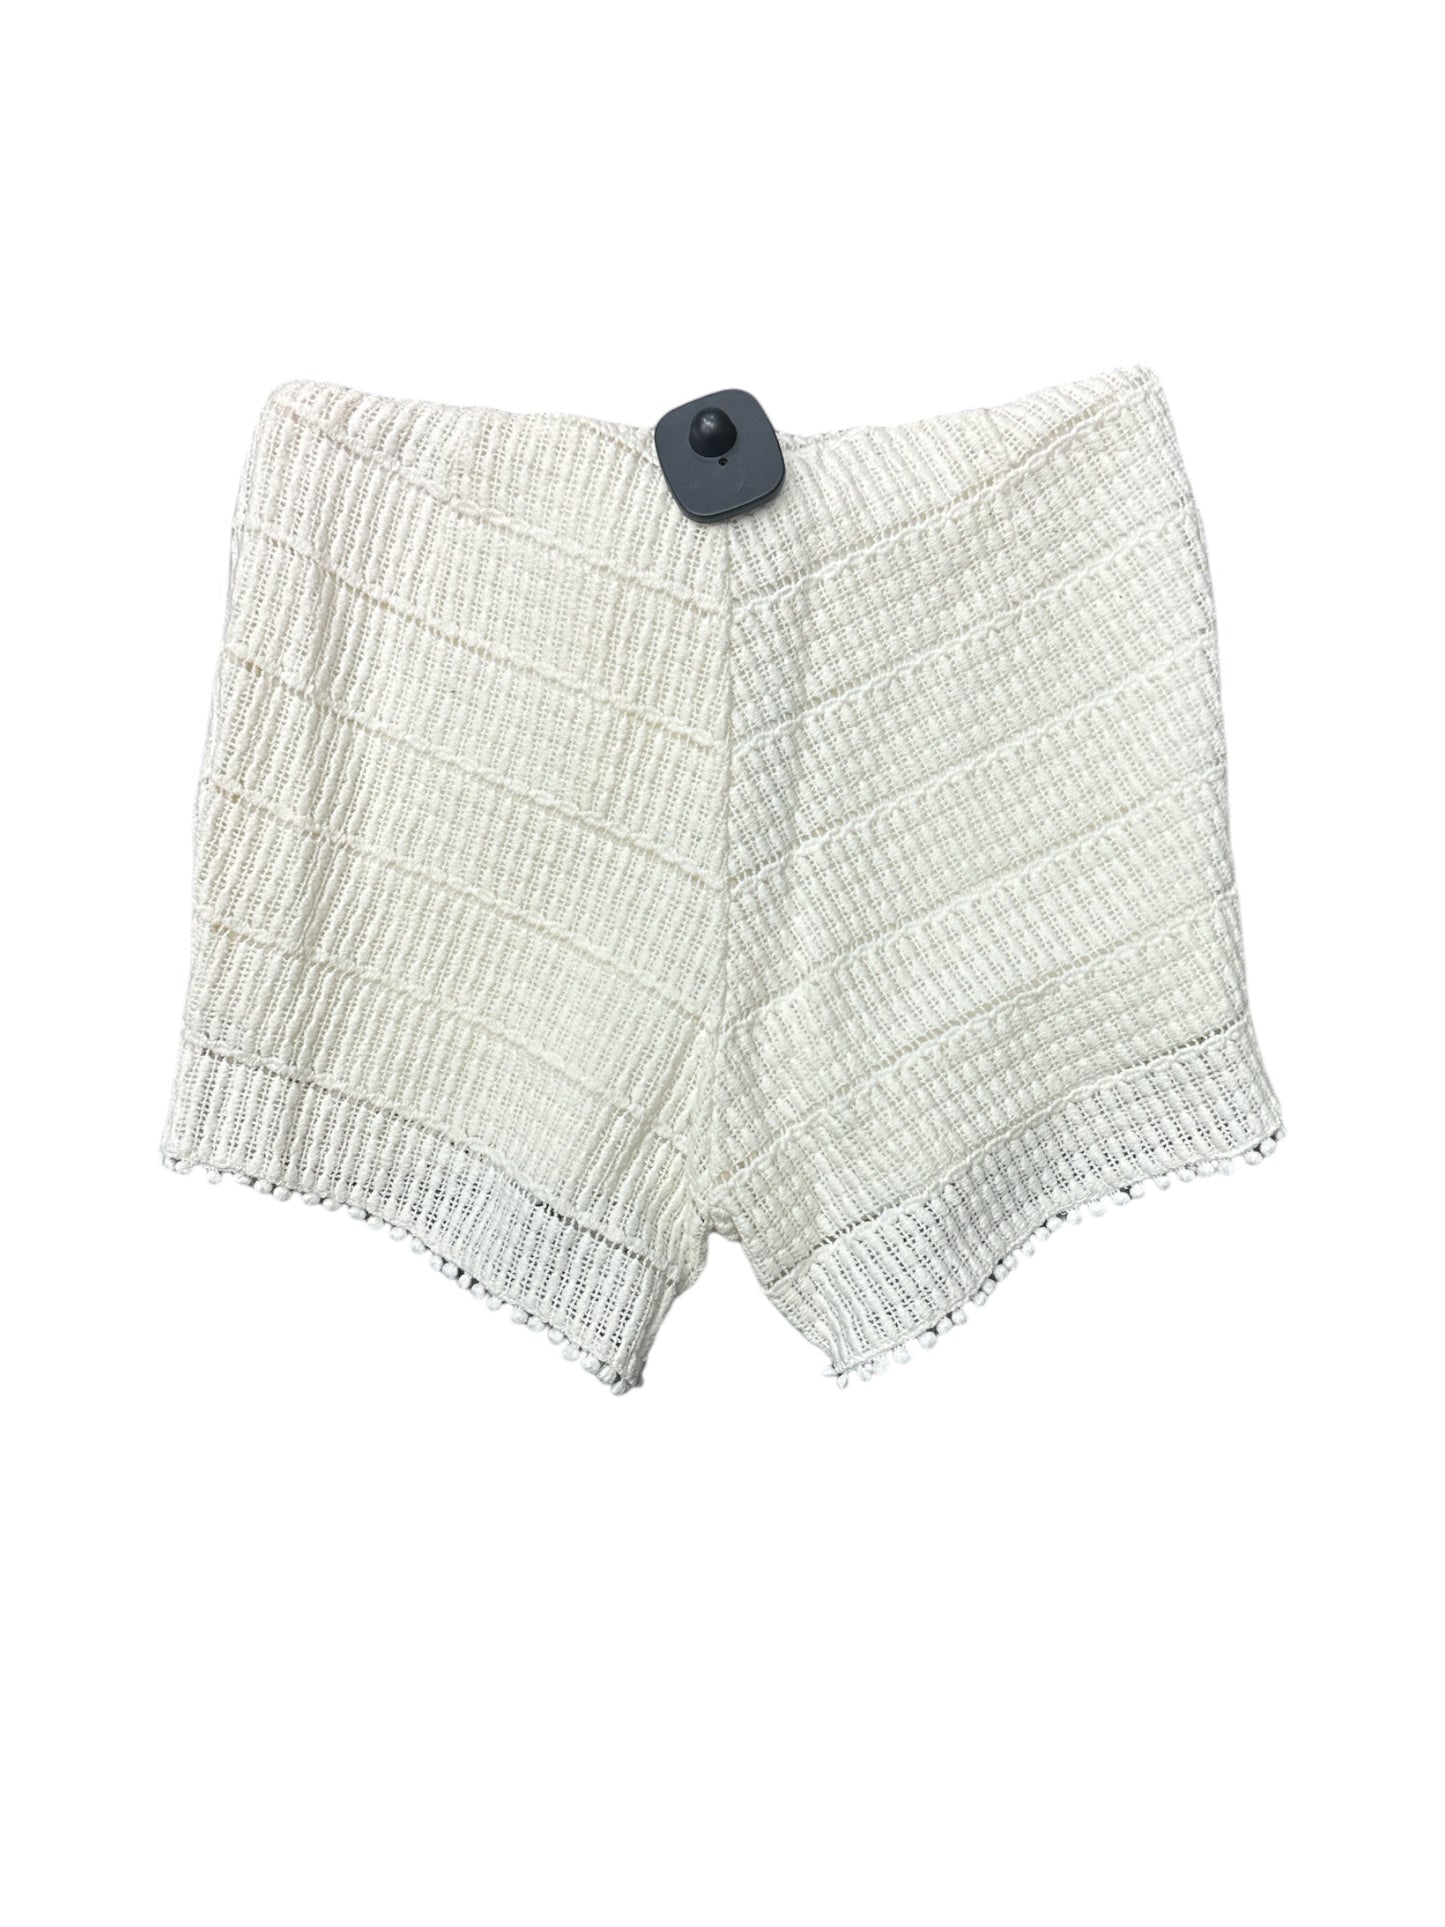 Shorts By Cmc  Size: 0